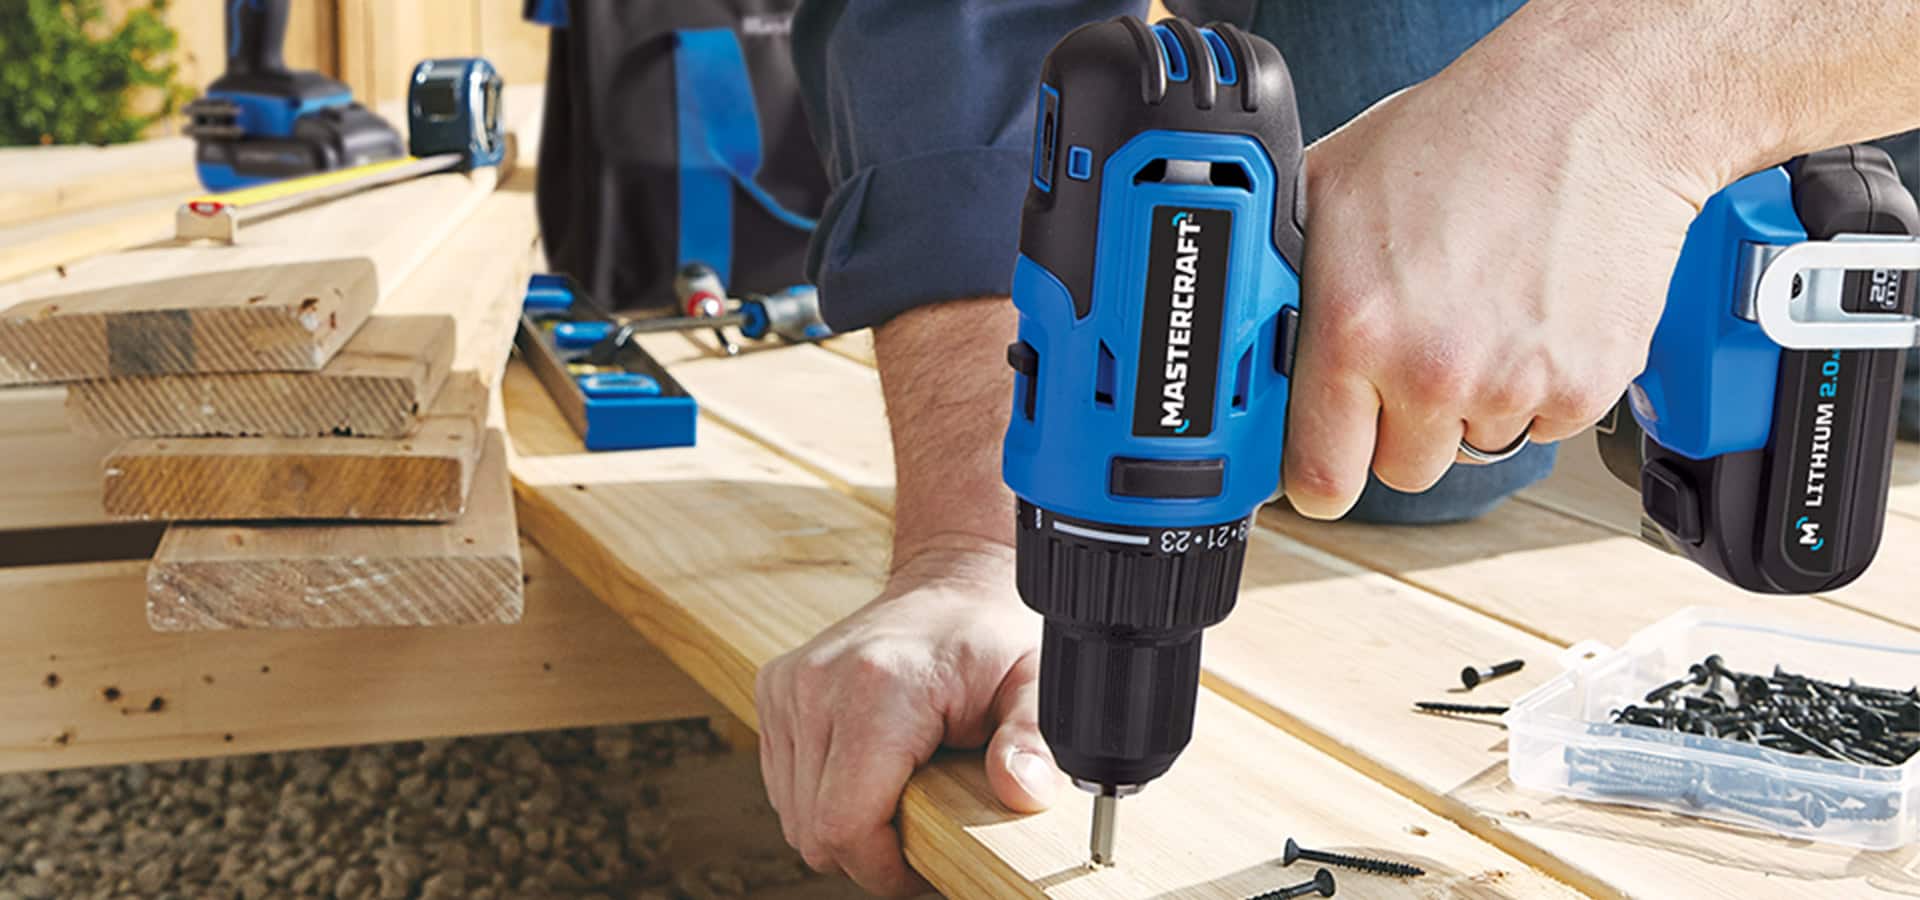 Hand using a blue cordless Mastercraft drill to drill holes in wood.